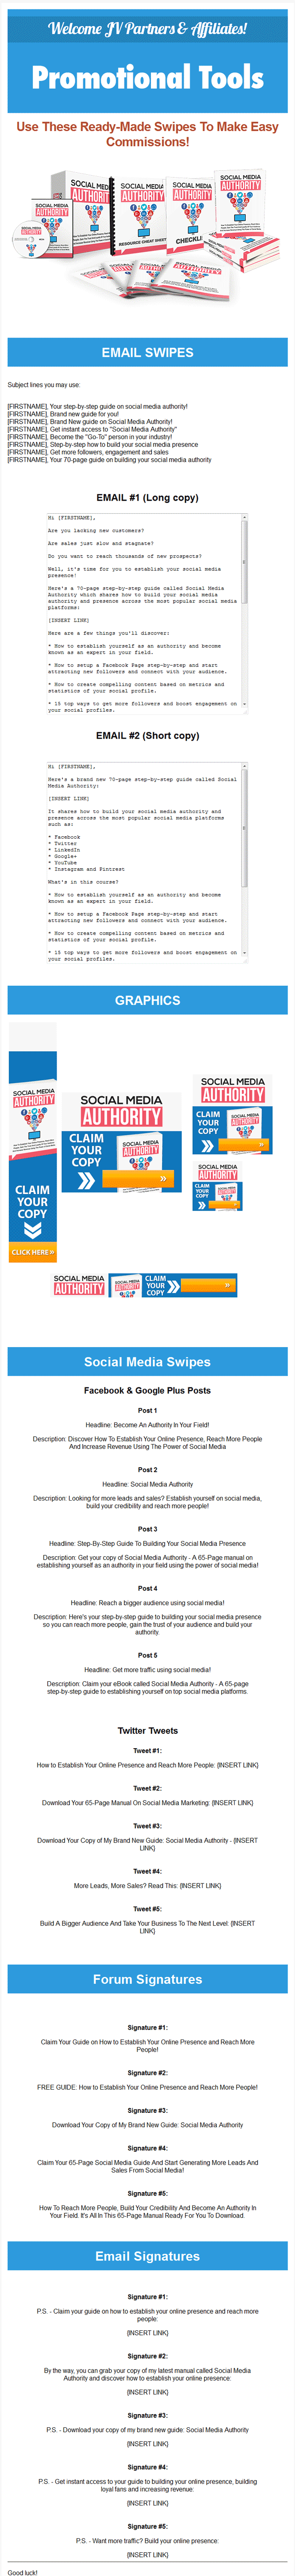 social media authority ebook and videos